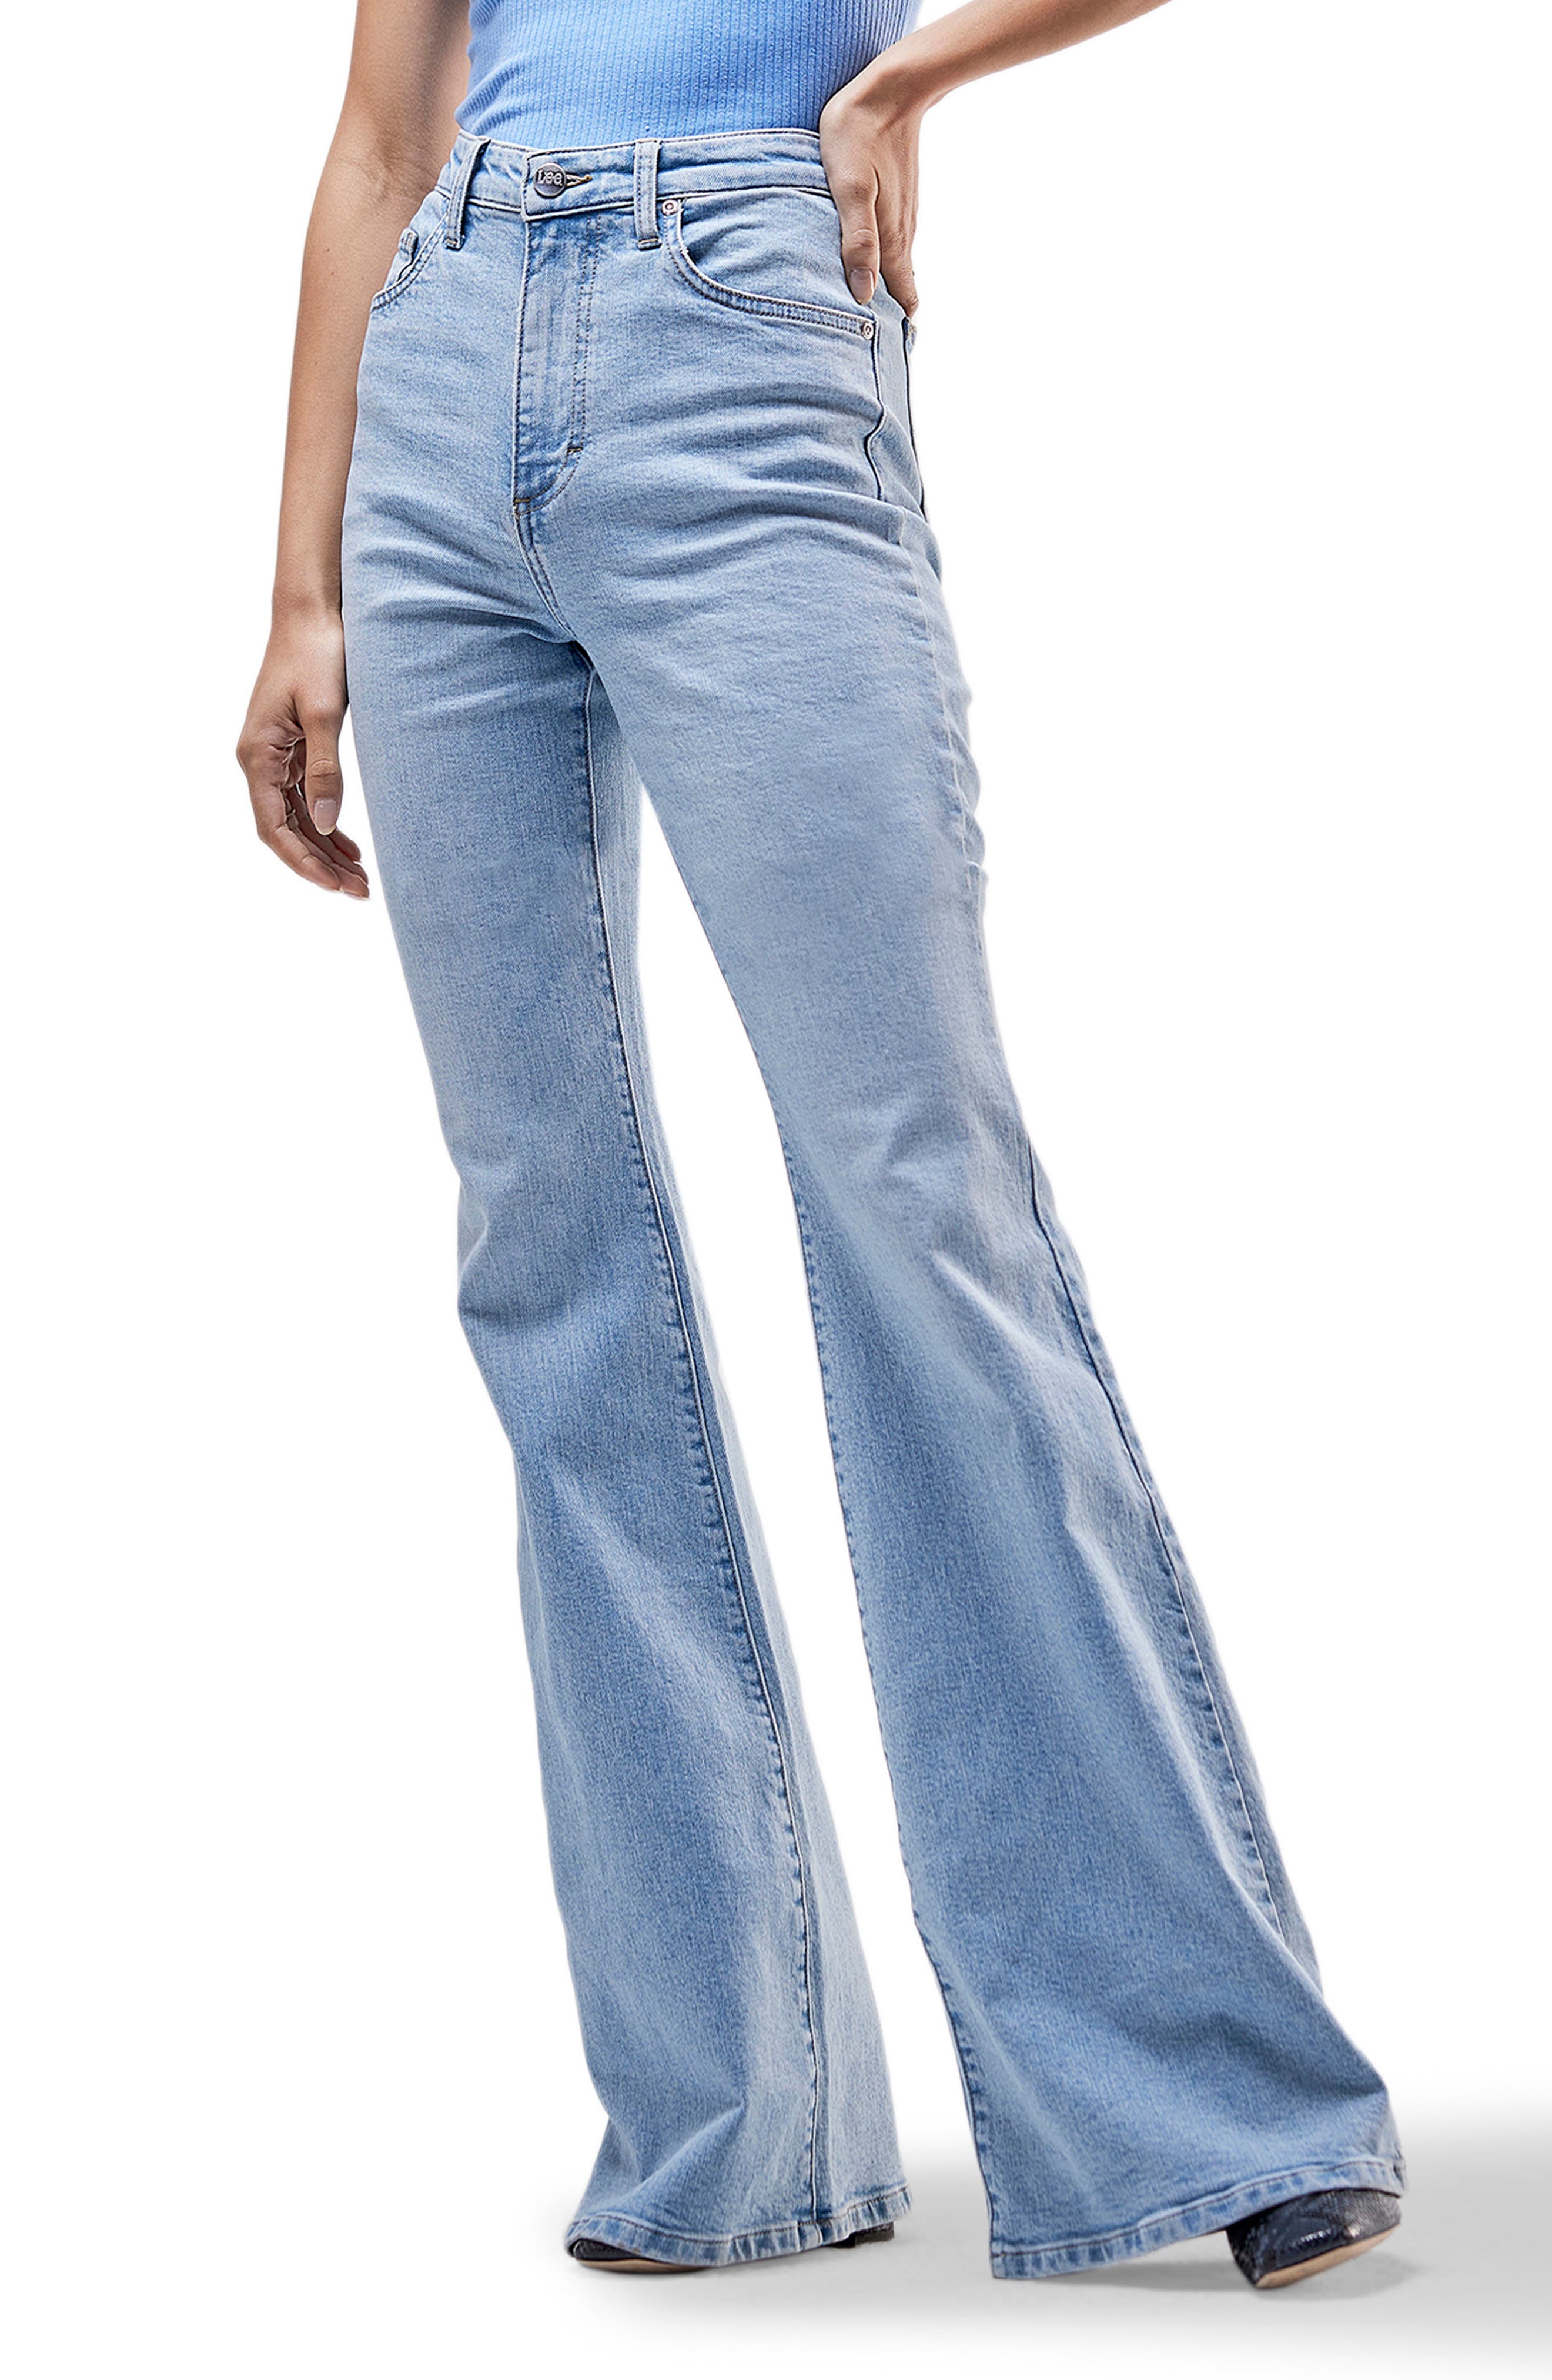 Lee High Waist Flare Jeans in Laundered Light